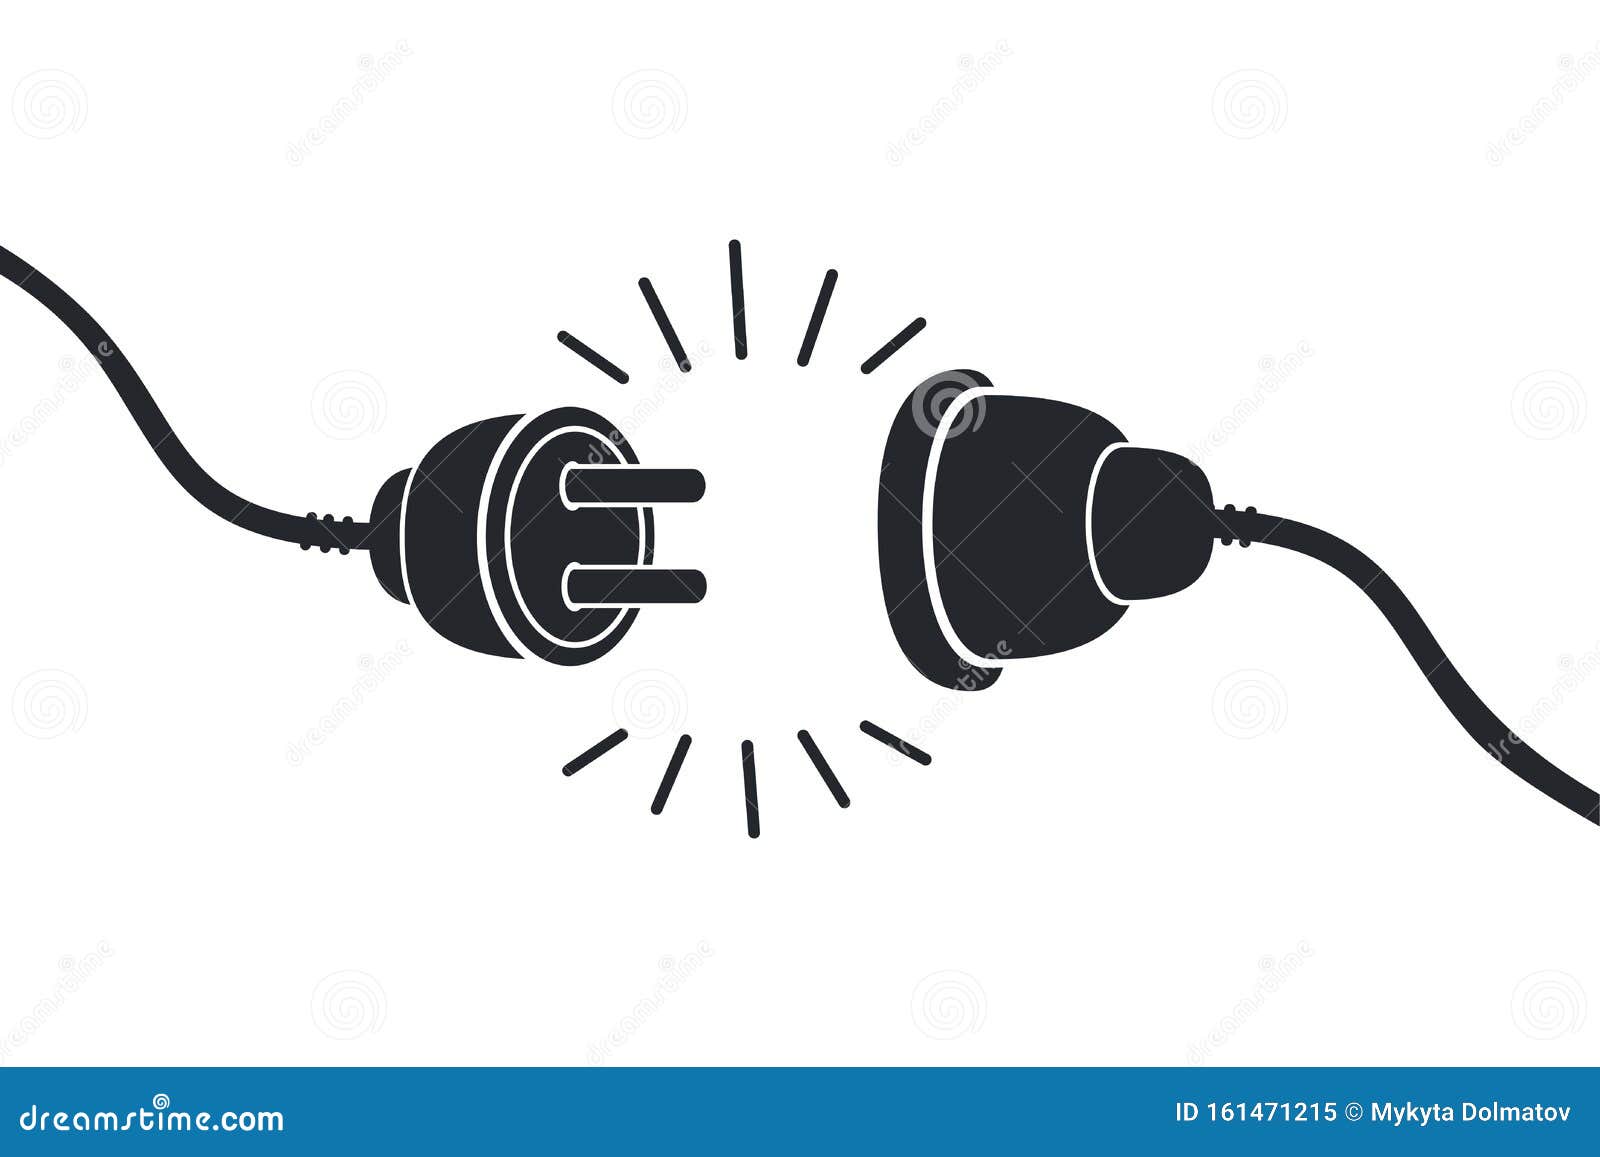 electric socket with a plug. connection and disconnection concept. concept of 404 error connection. electric plug